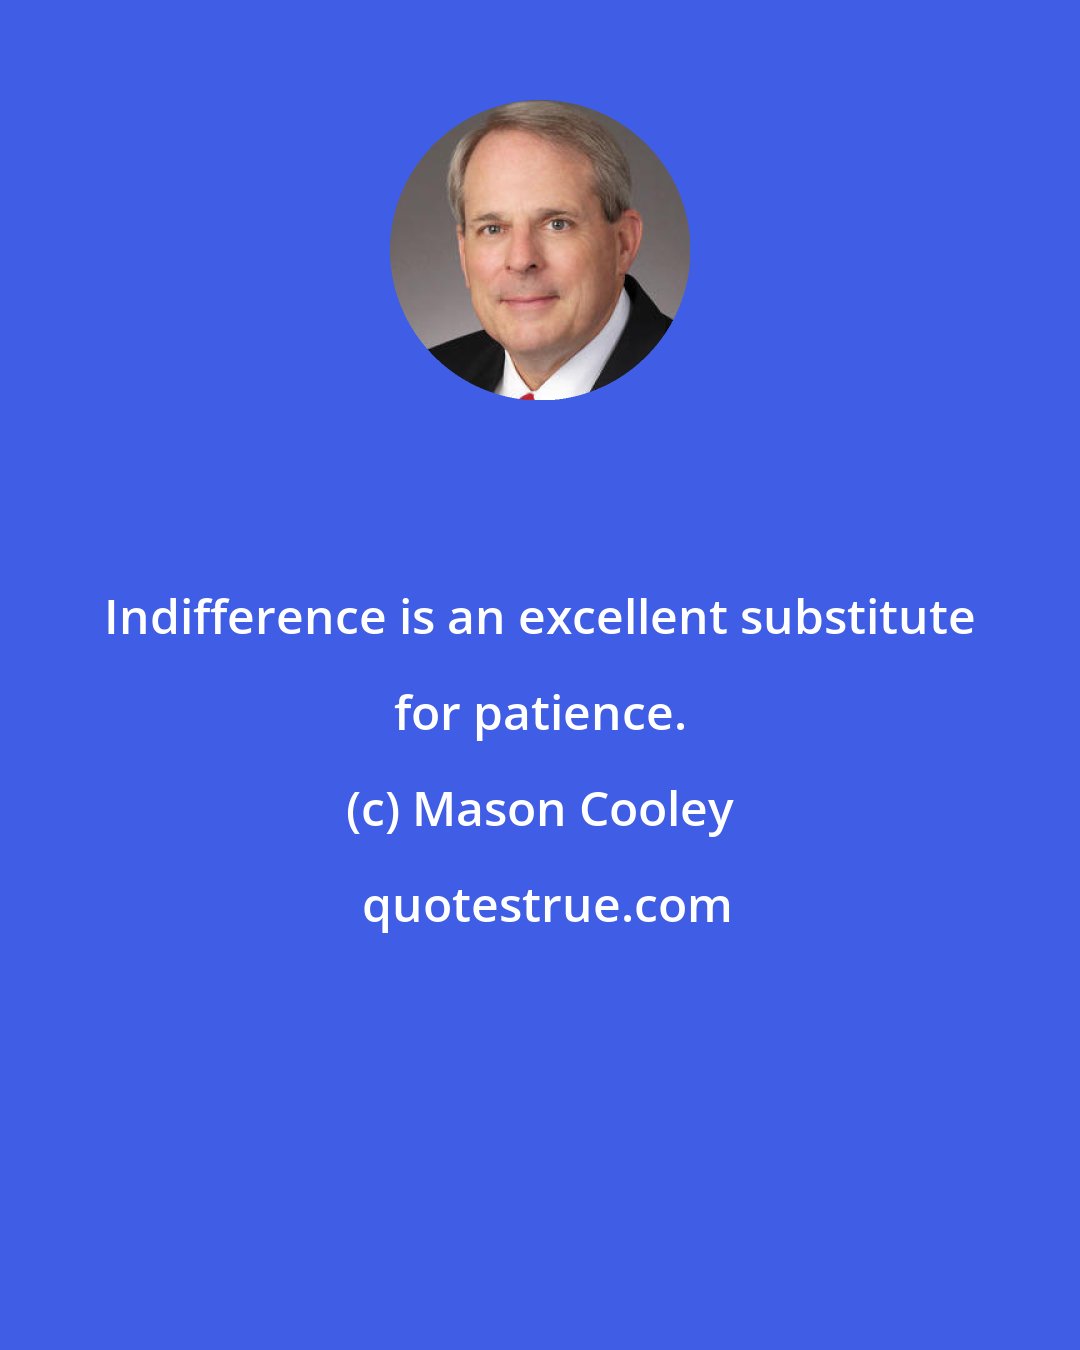 Mason Cooley: Indifference is an excellent substitute for patience.